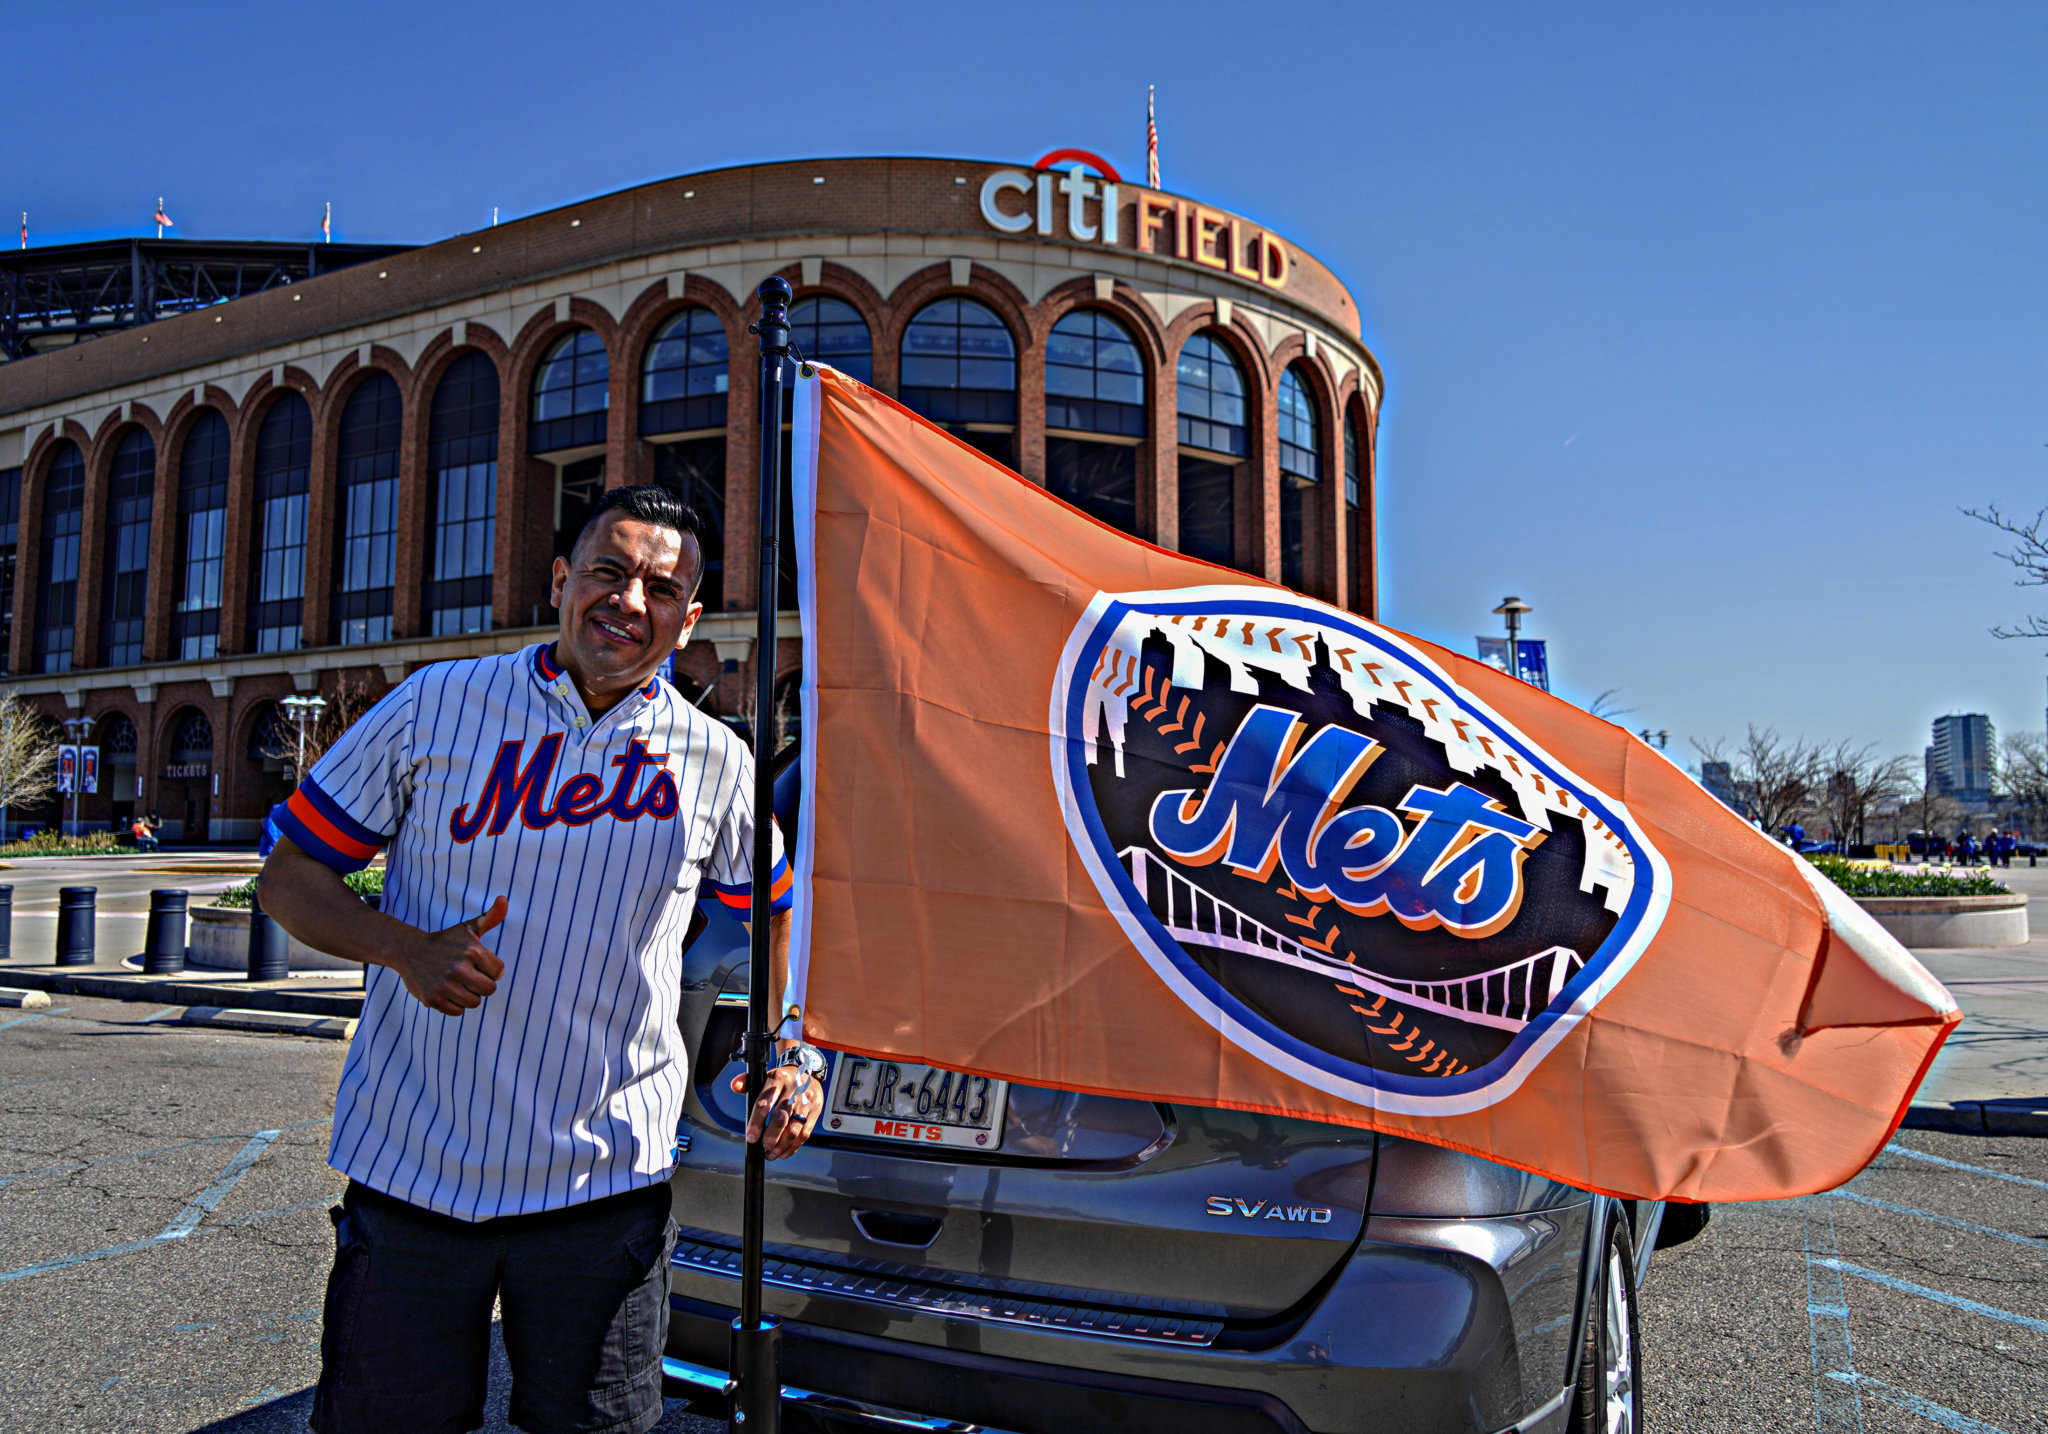 An Amazin’ day for Mets fans as they return to Citi Field amNewYork